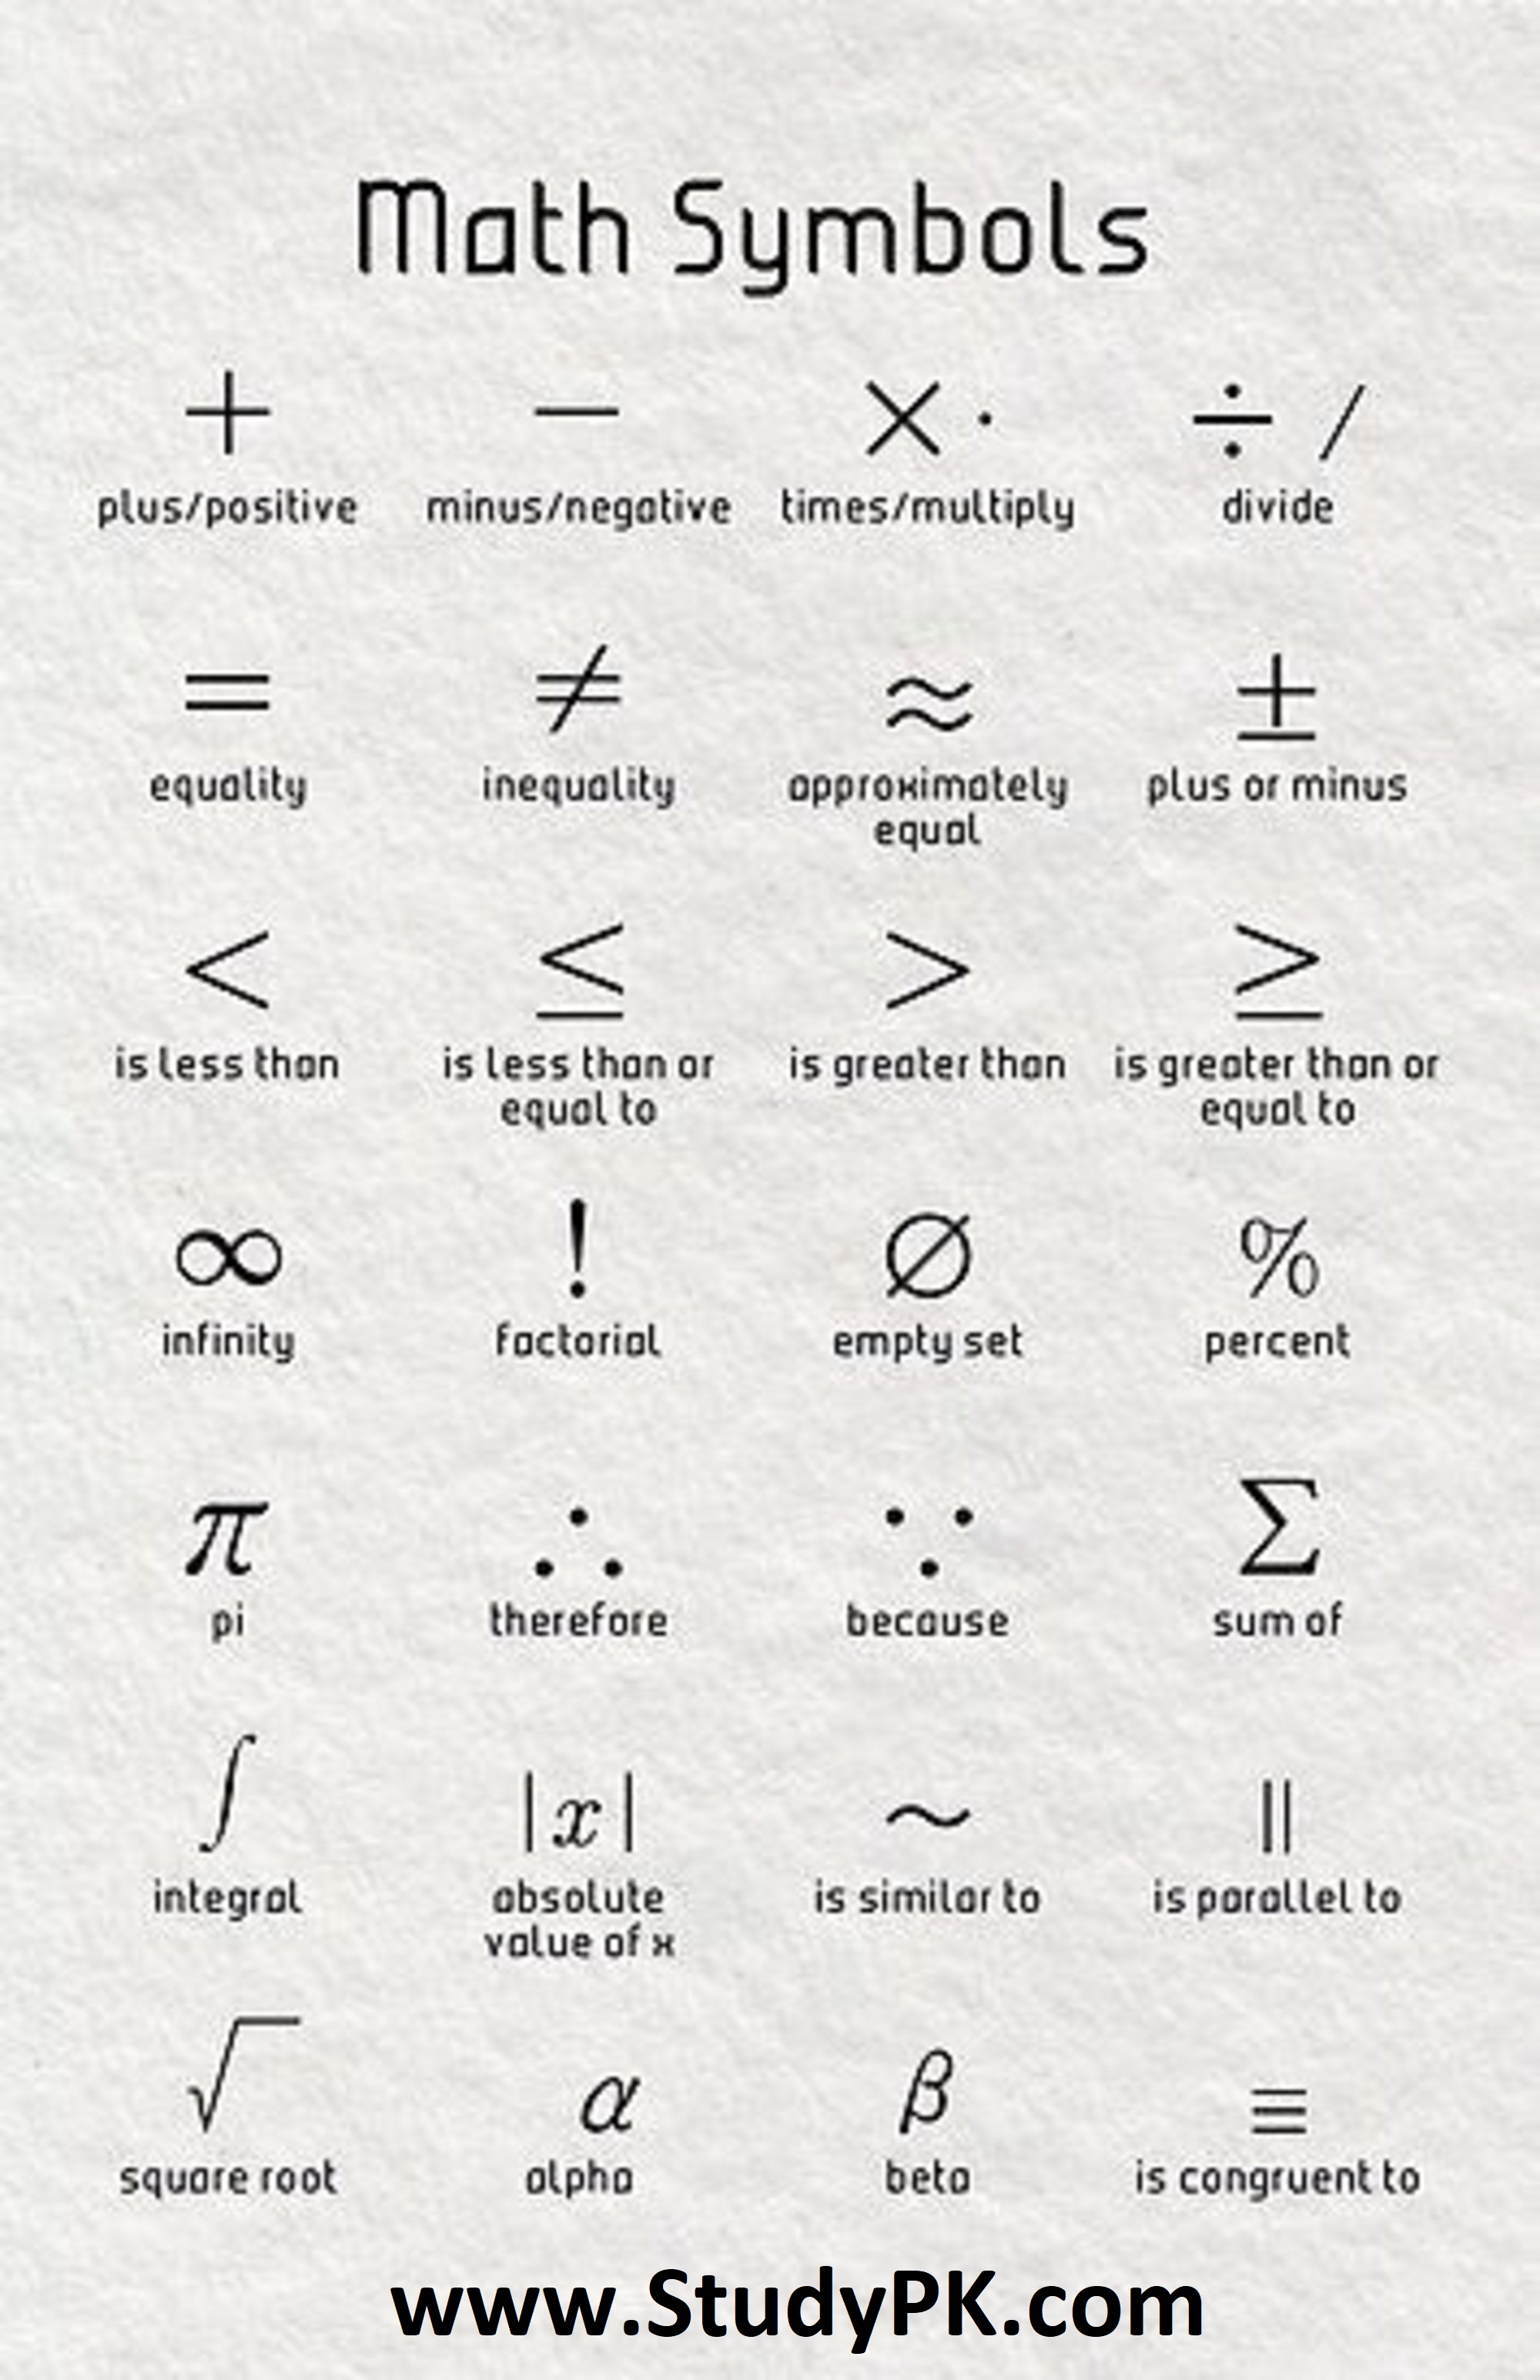 Mathematical symbols with their English names (+,-,x,/,=,<,>,...)